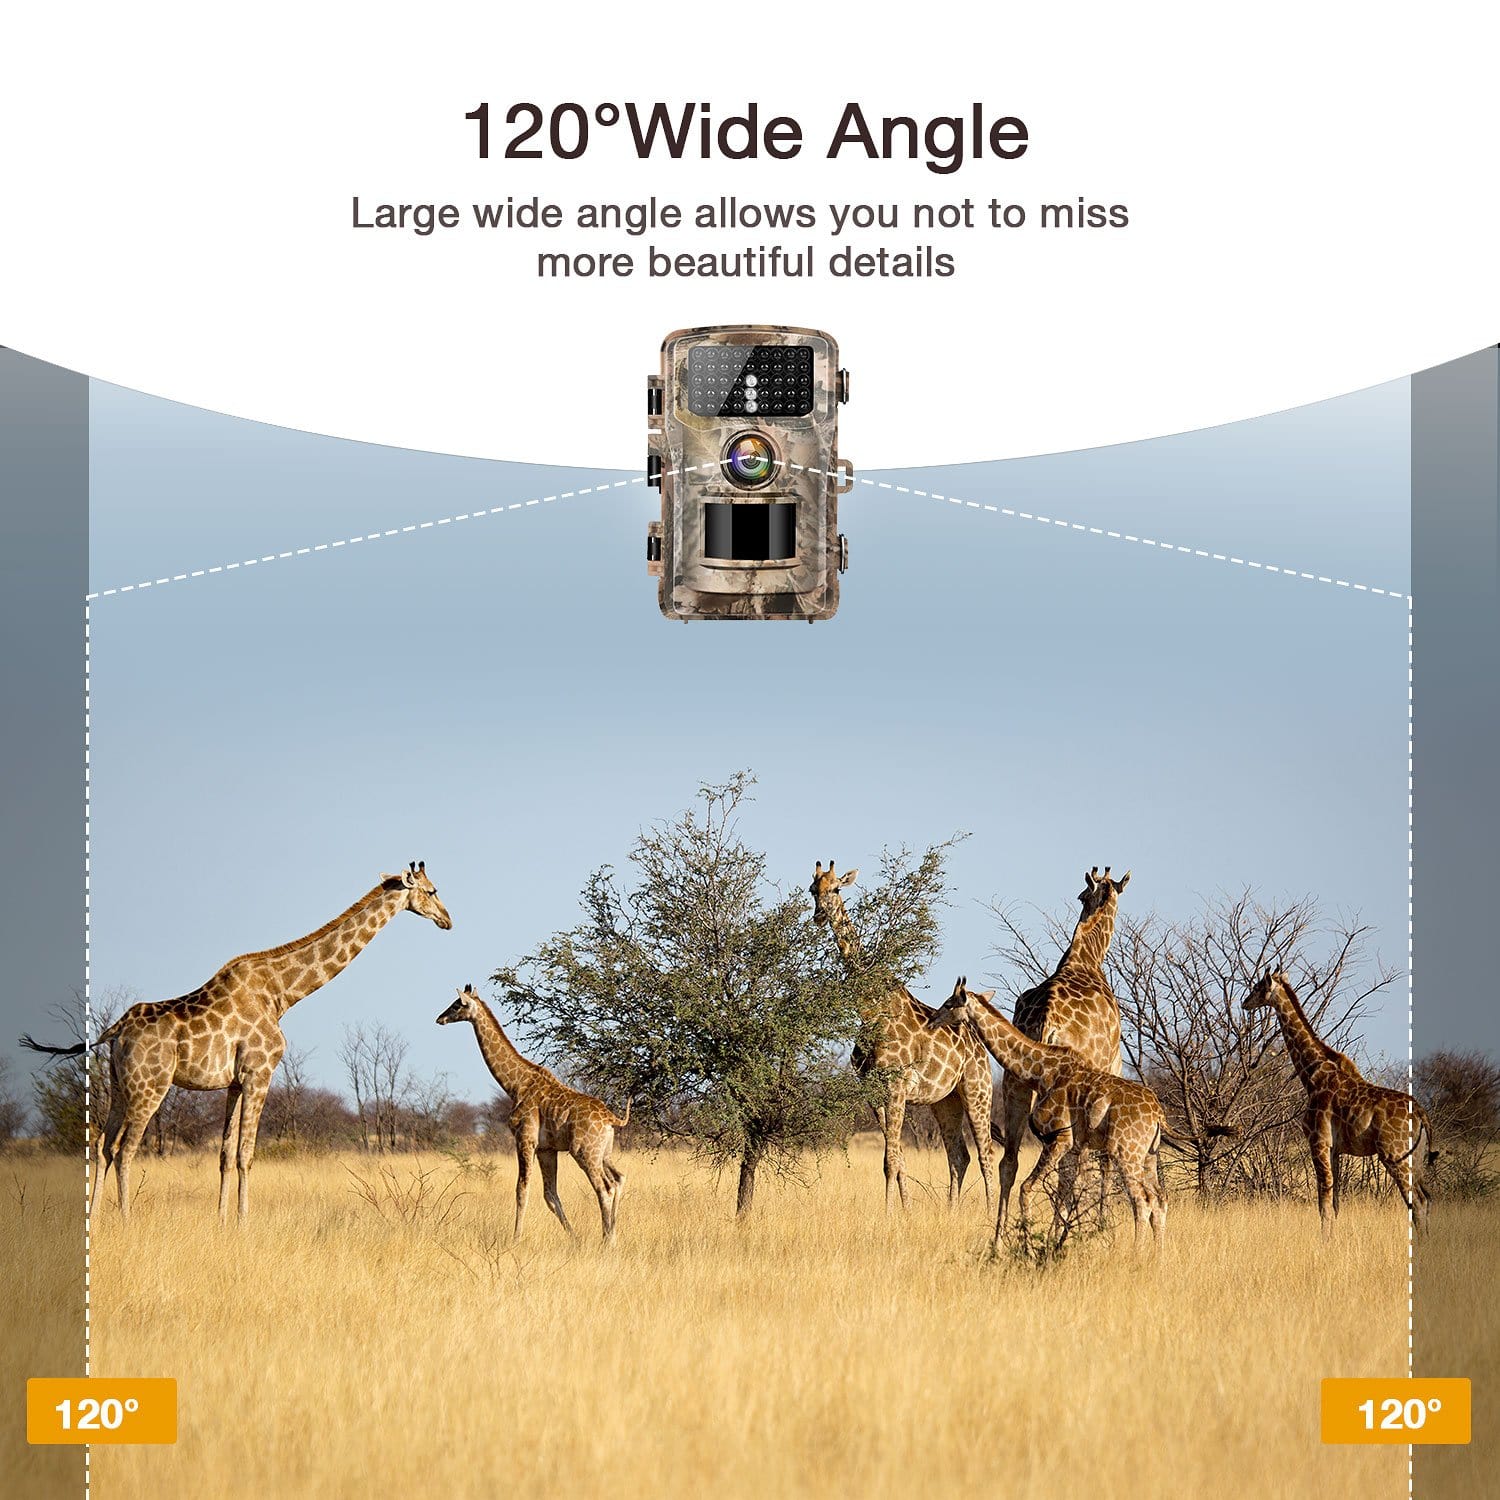 Campark T40-1 Trail Camera Has a 120° wide angle